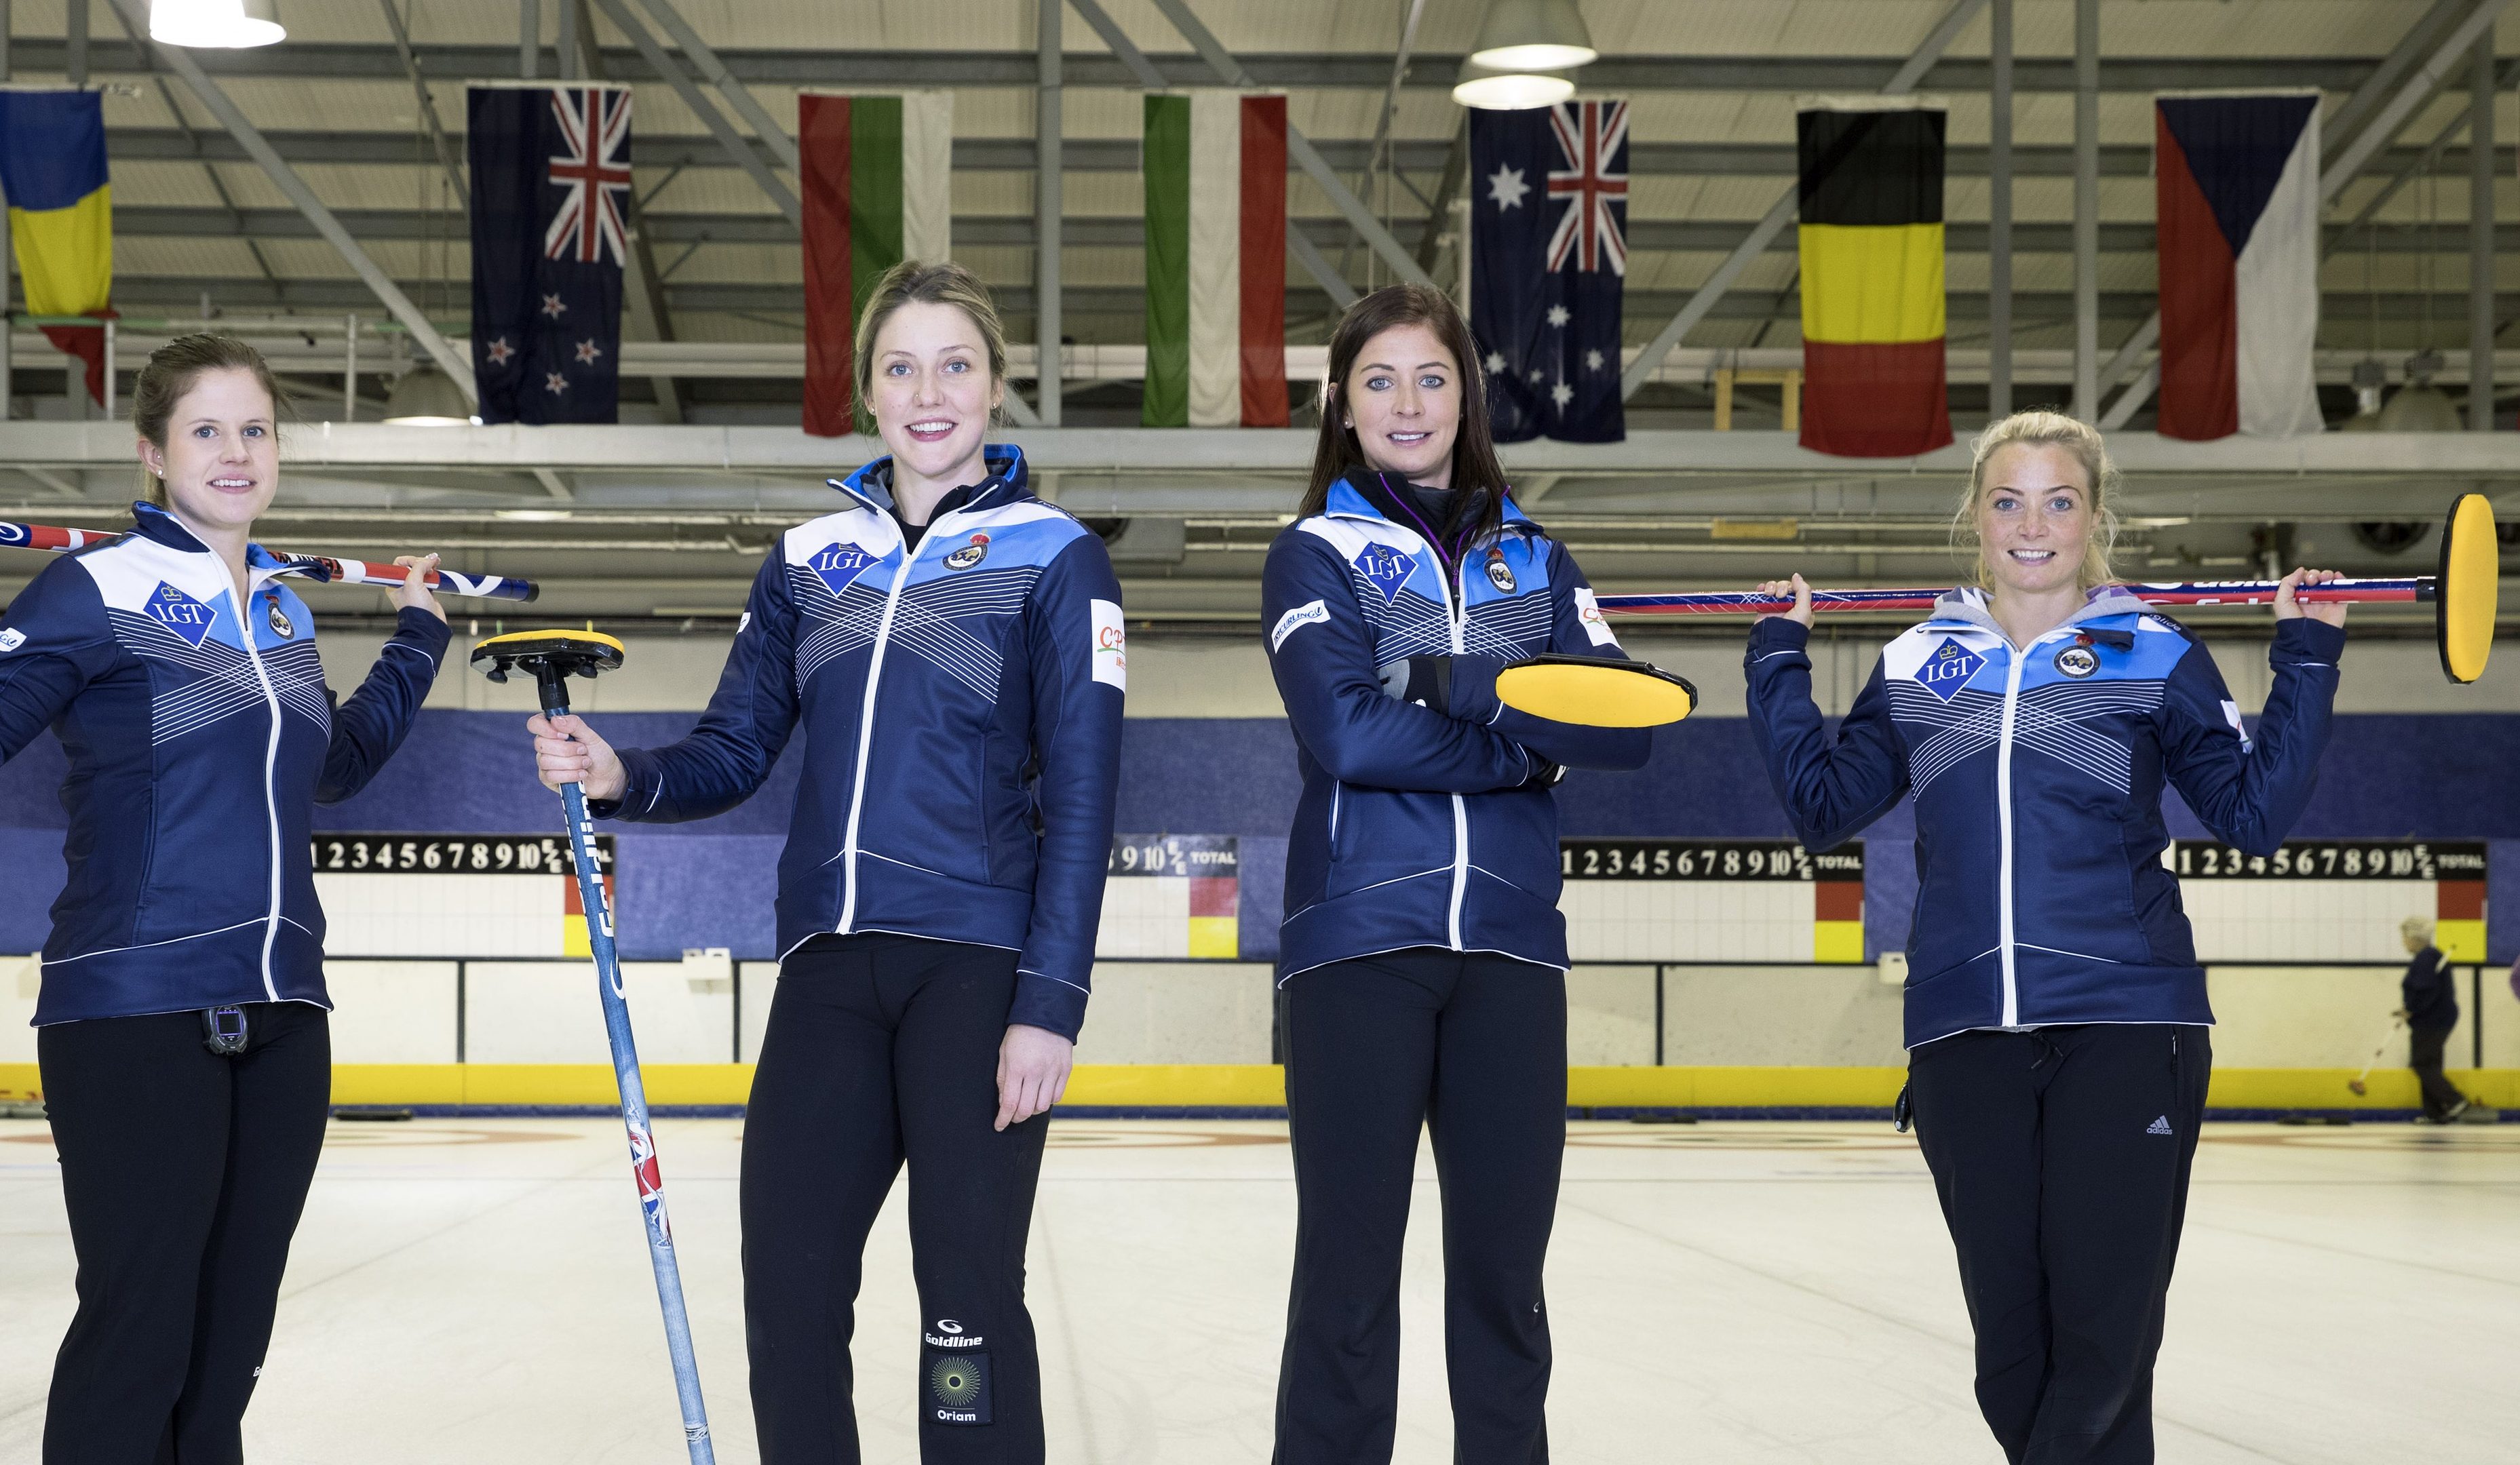 Team Muirhead are ready to take on the world in China.